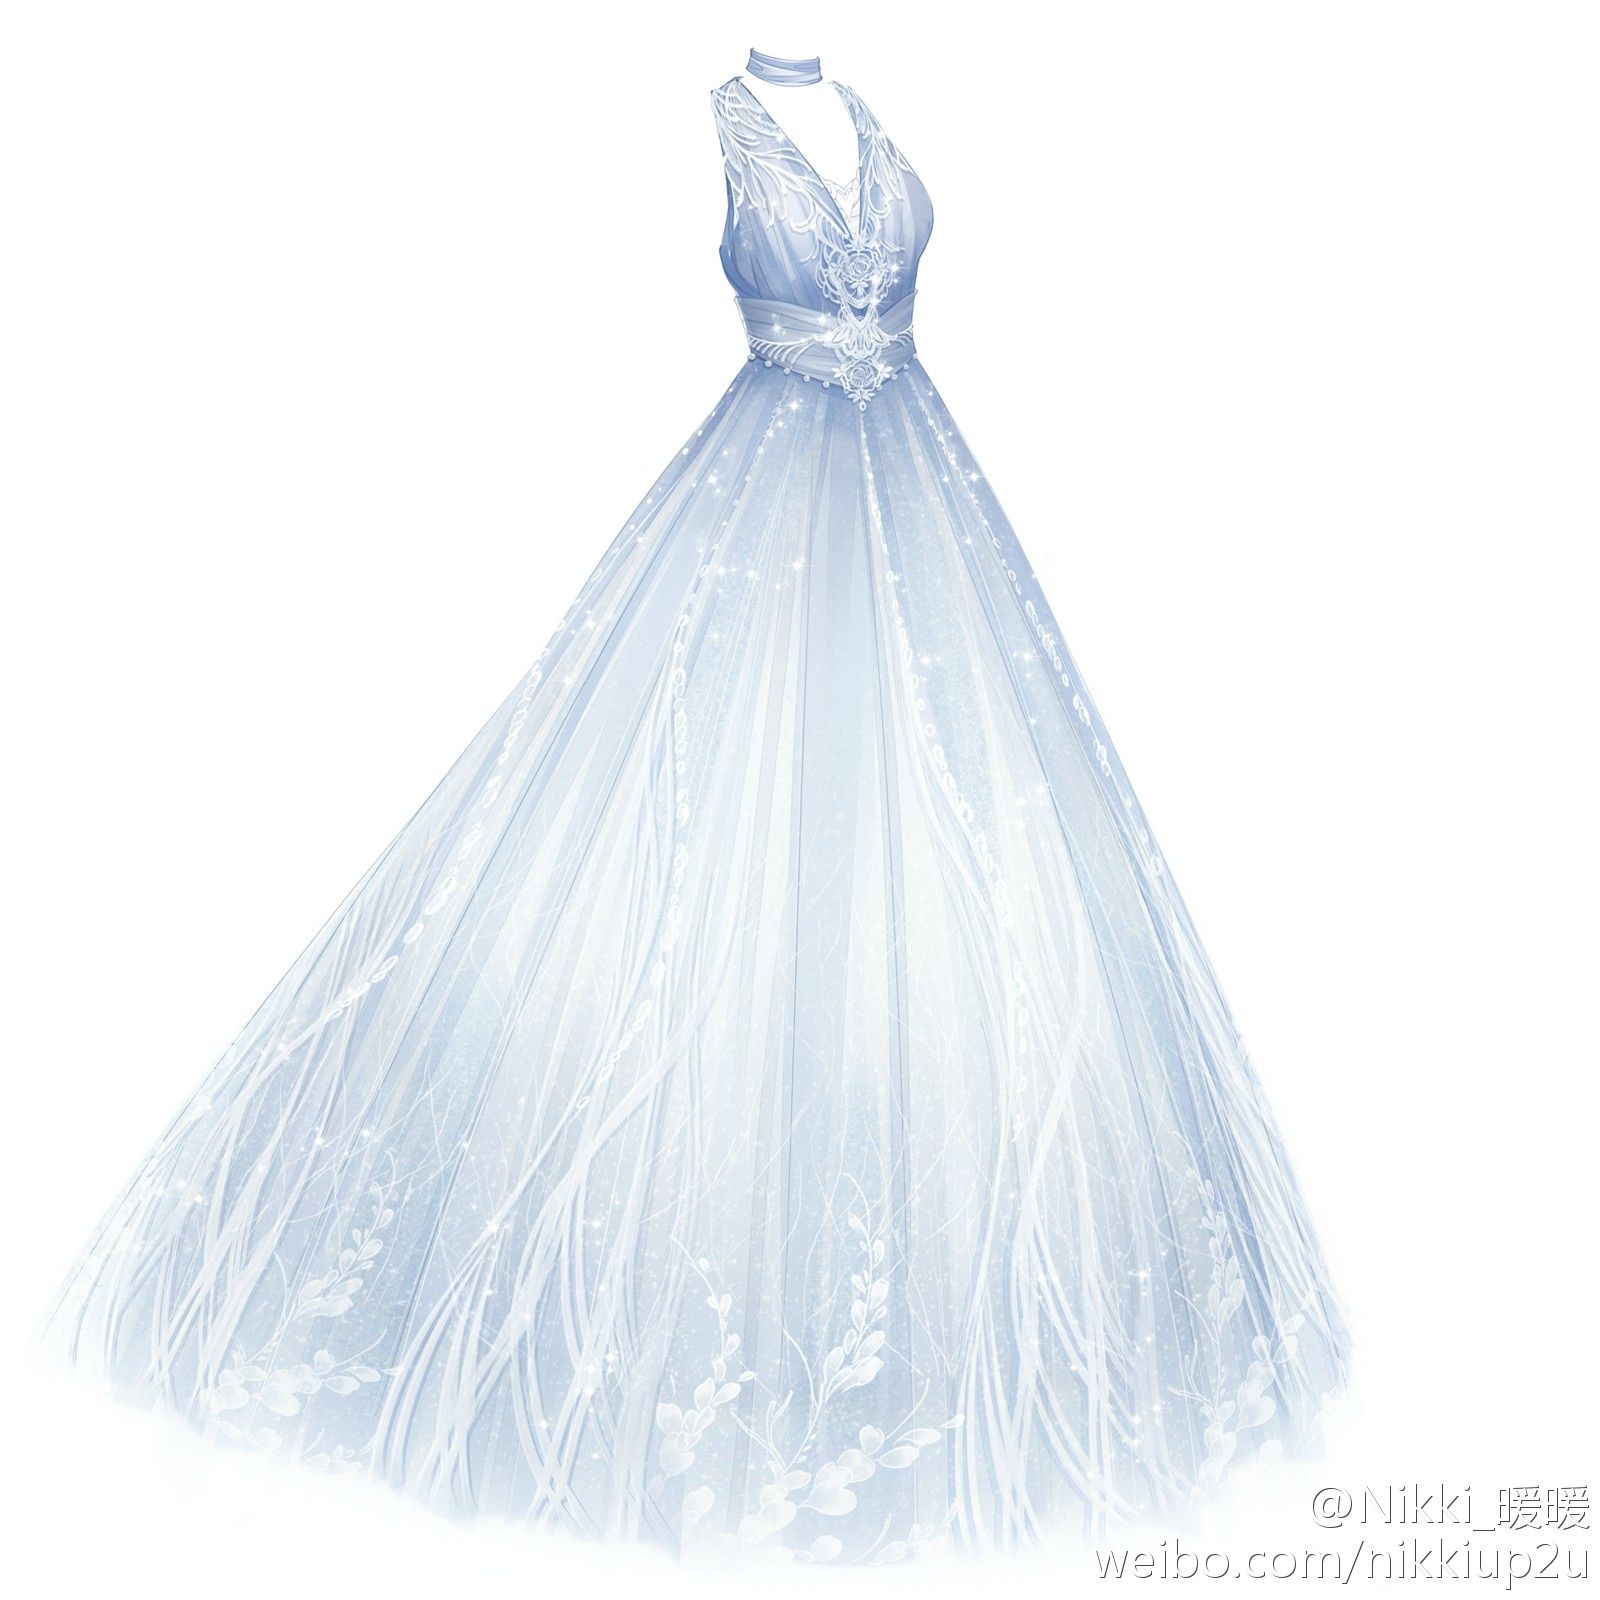 Gown Drawing at GetDrawings Free download